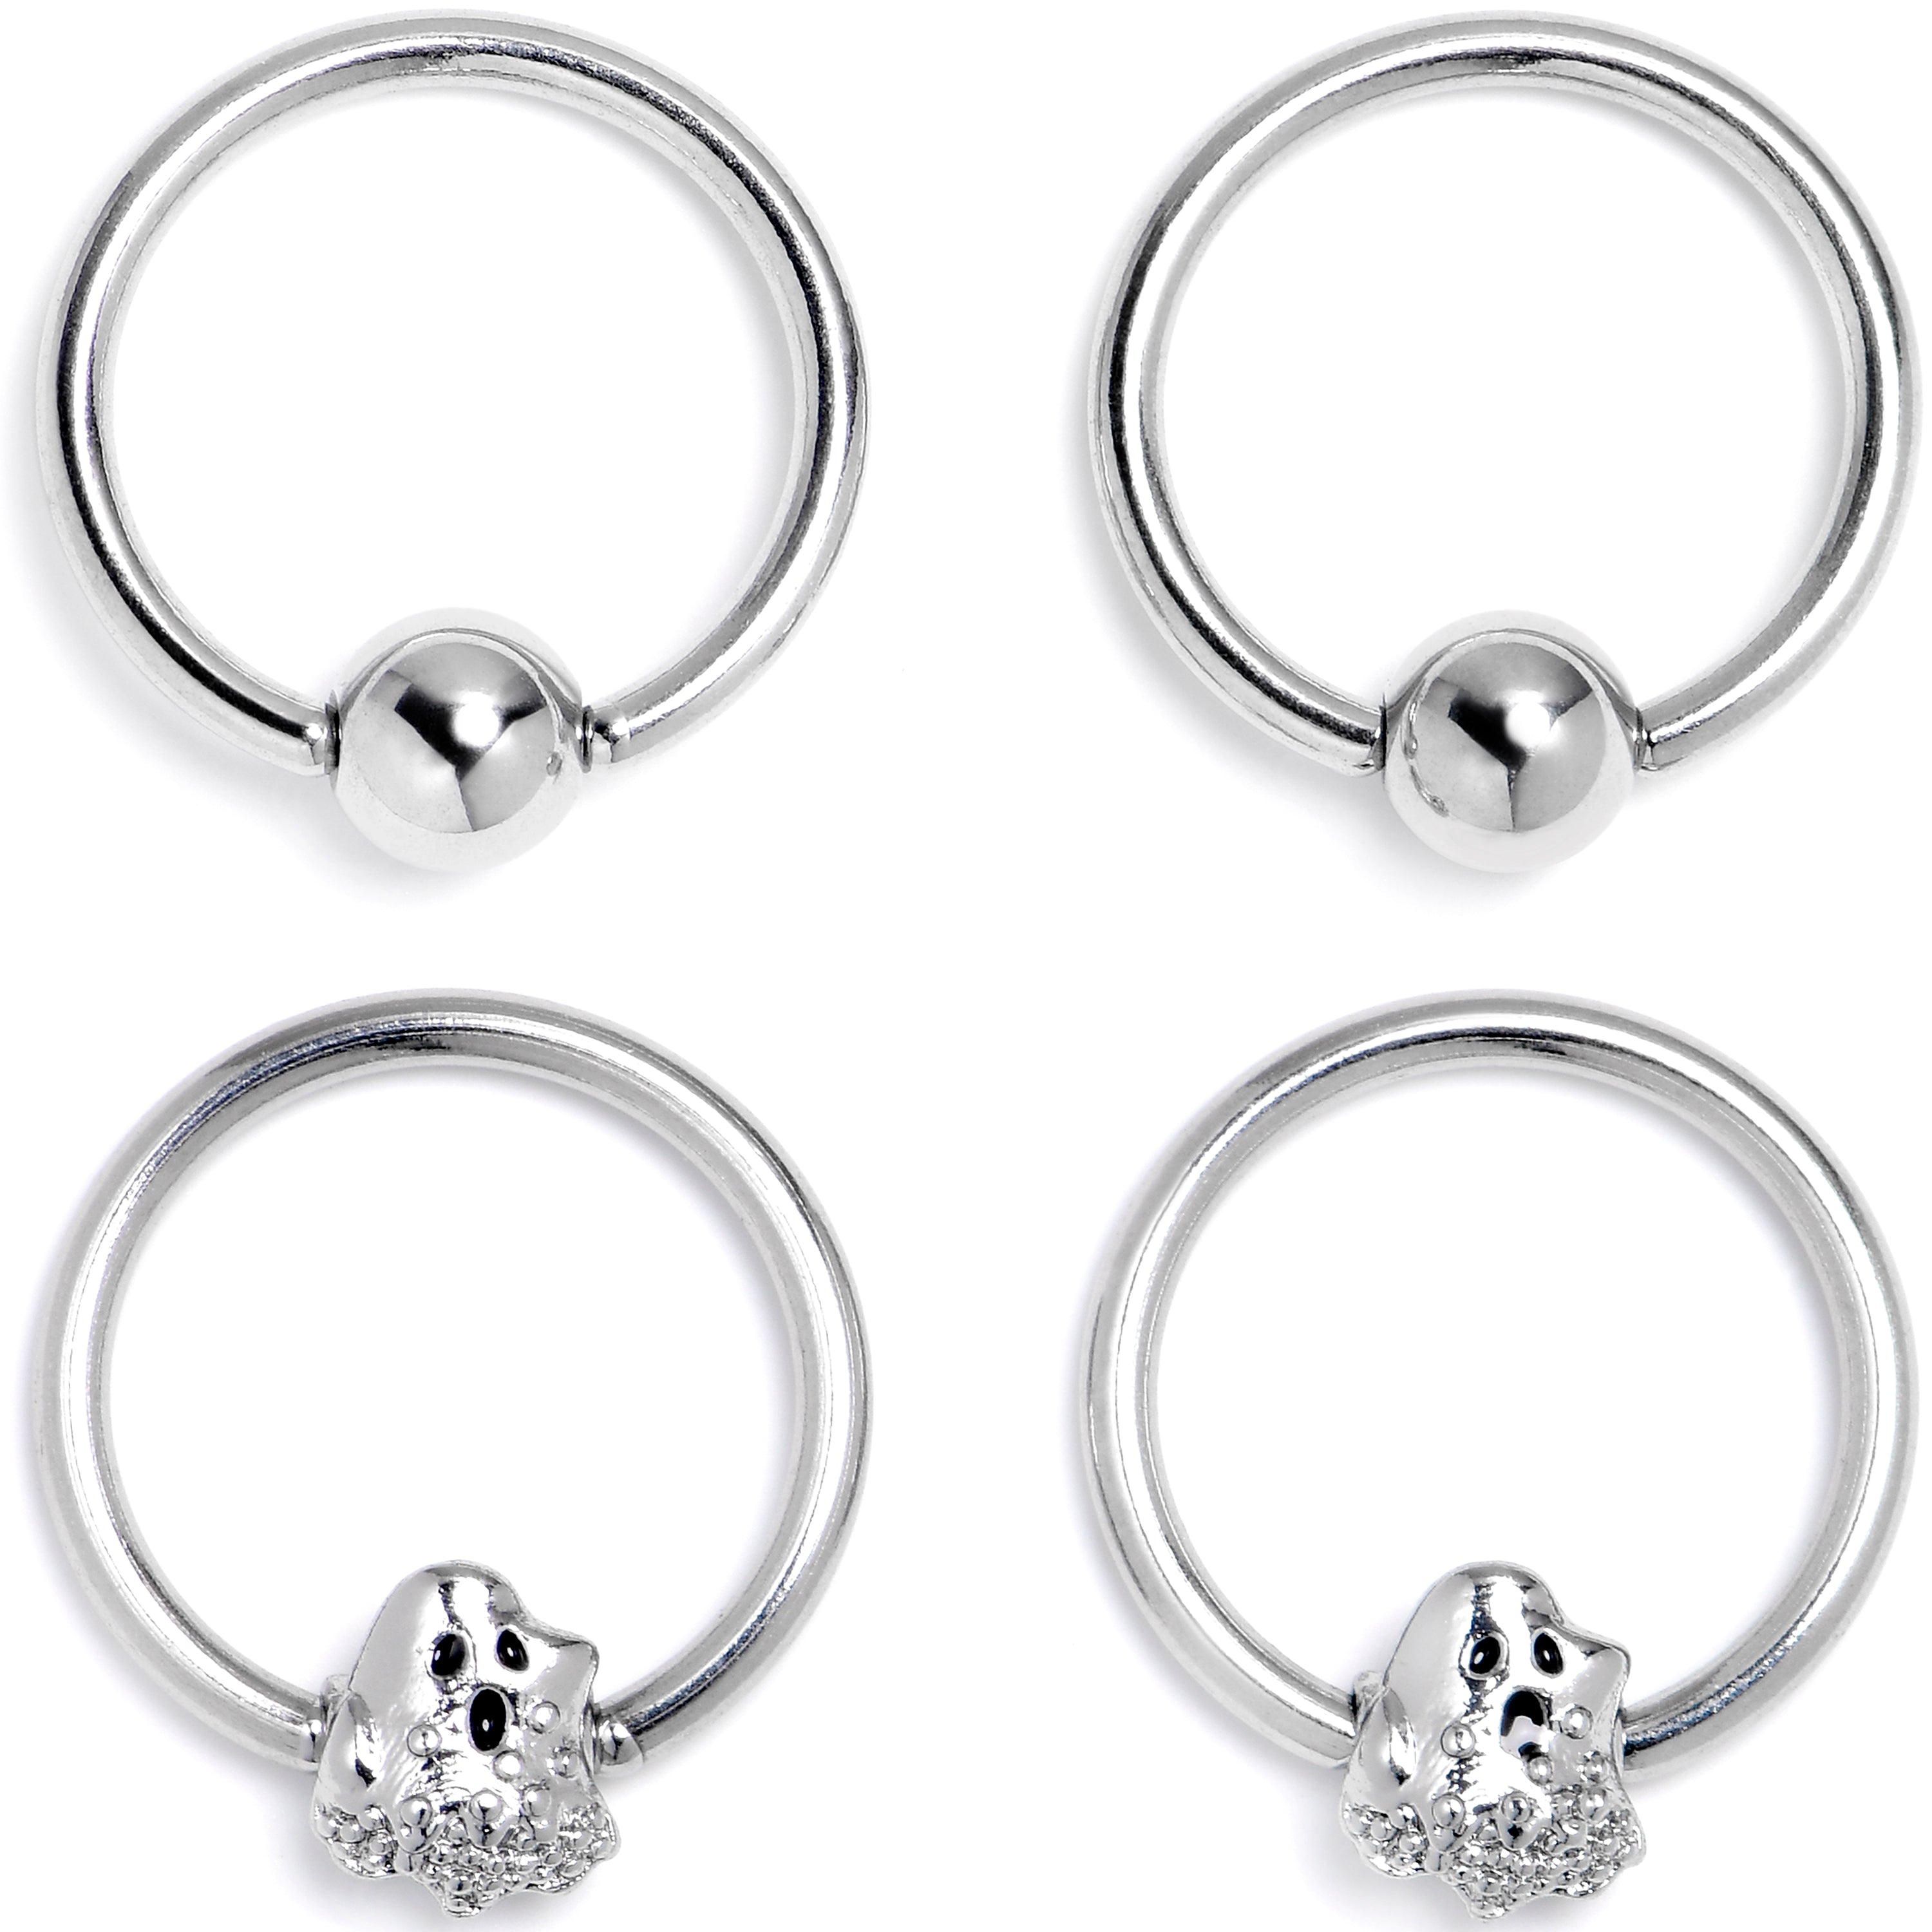 16 Gauge 3/8 Howling Ghost BCR Captive Ring Set of 4